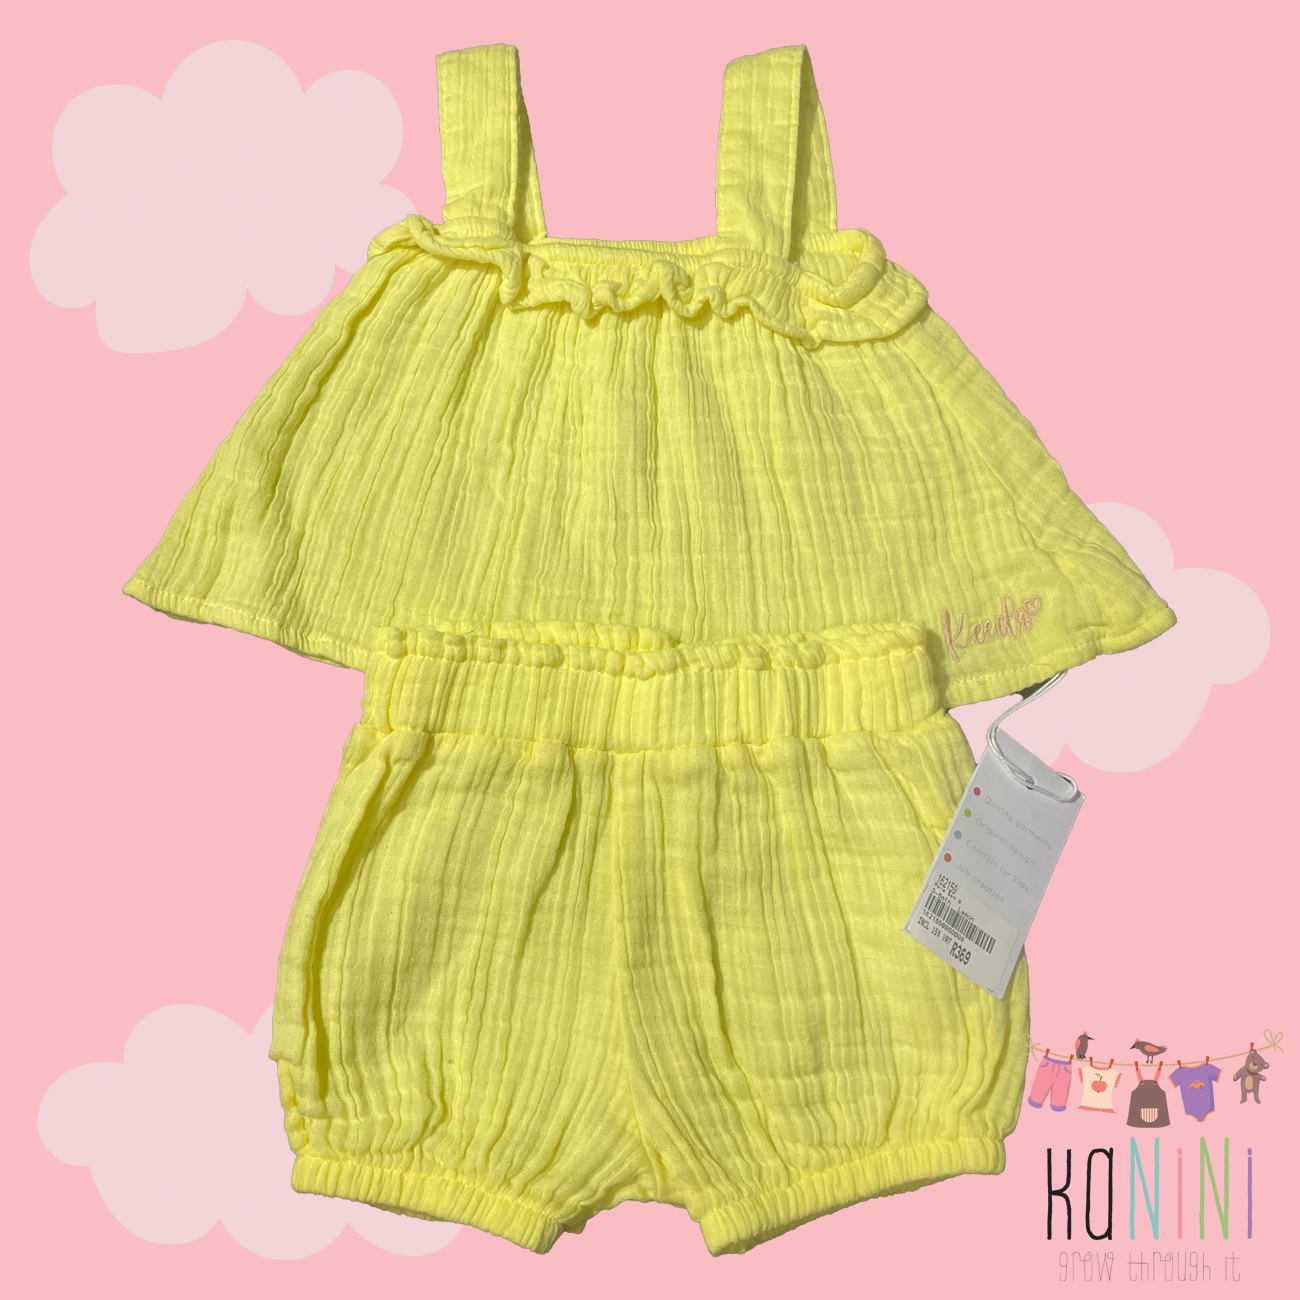 Featured image for “Keedo 3 - 6 Months Girls Yellow Summer Set”